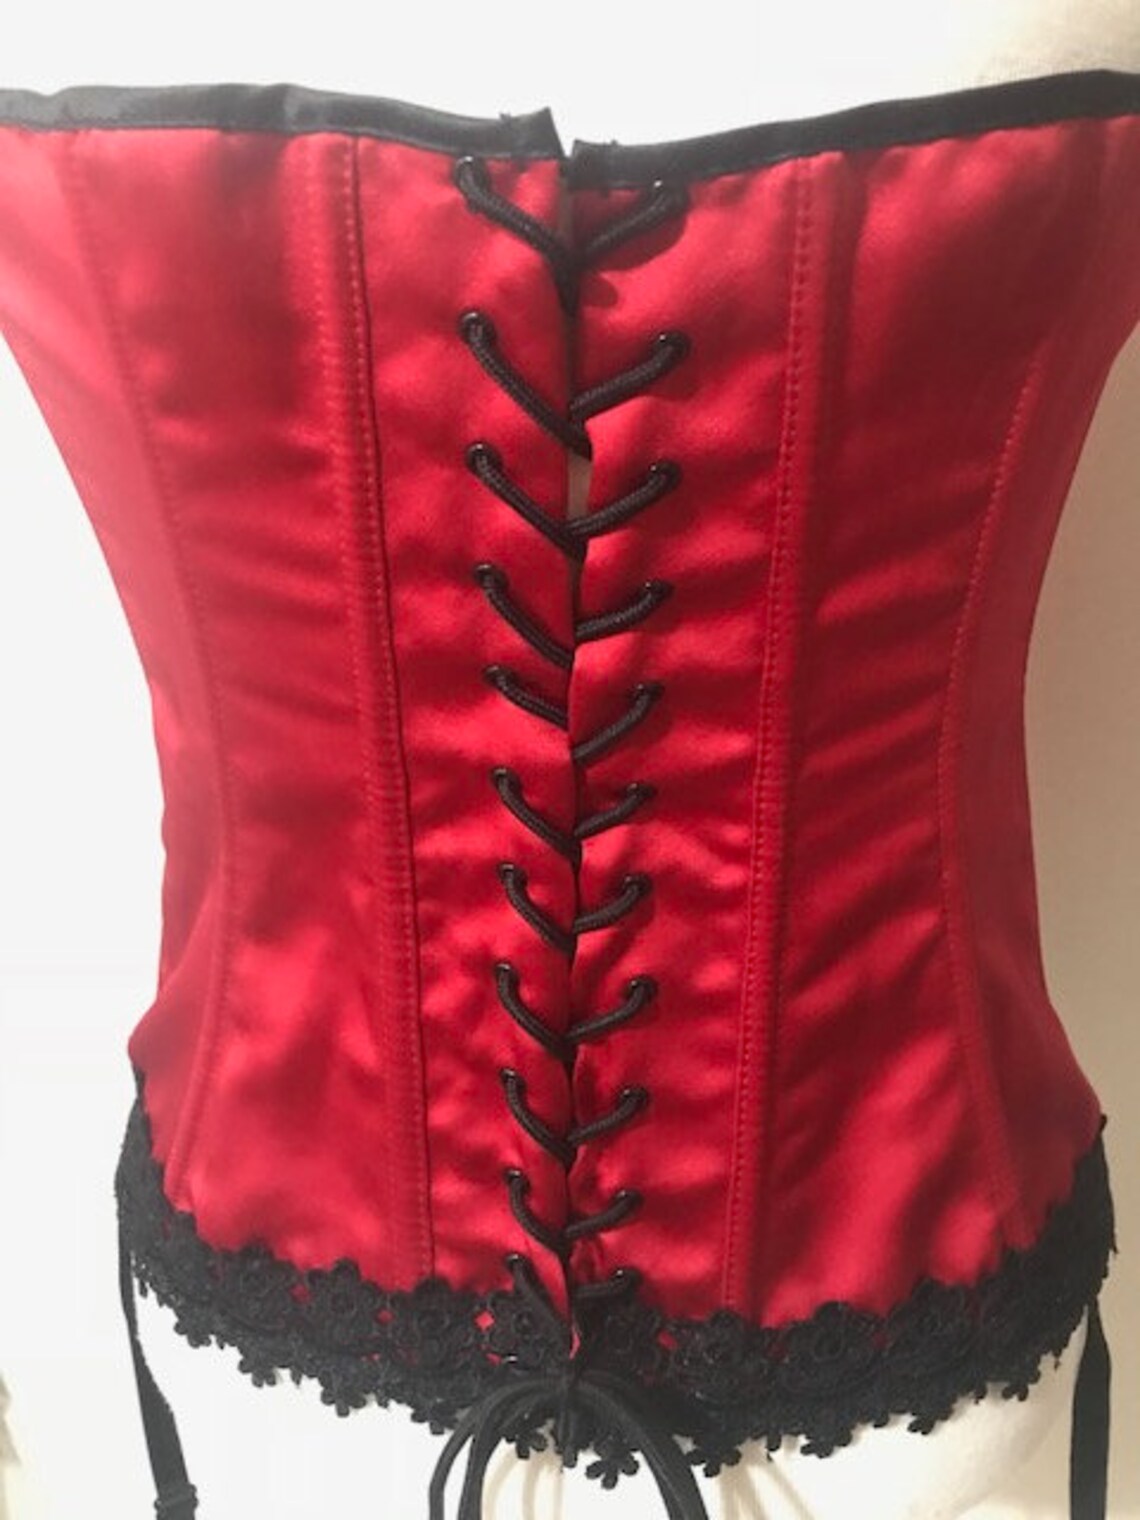 Vintage Sexy Red Color Satin and Lace Corset With Garter | Etsy